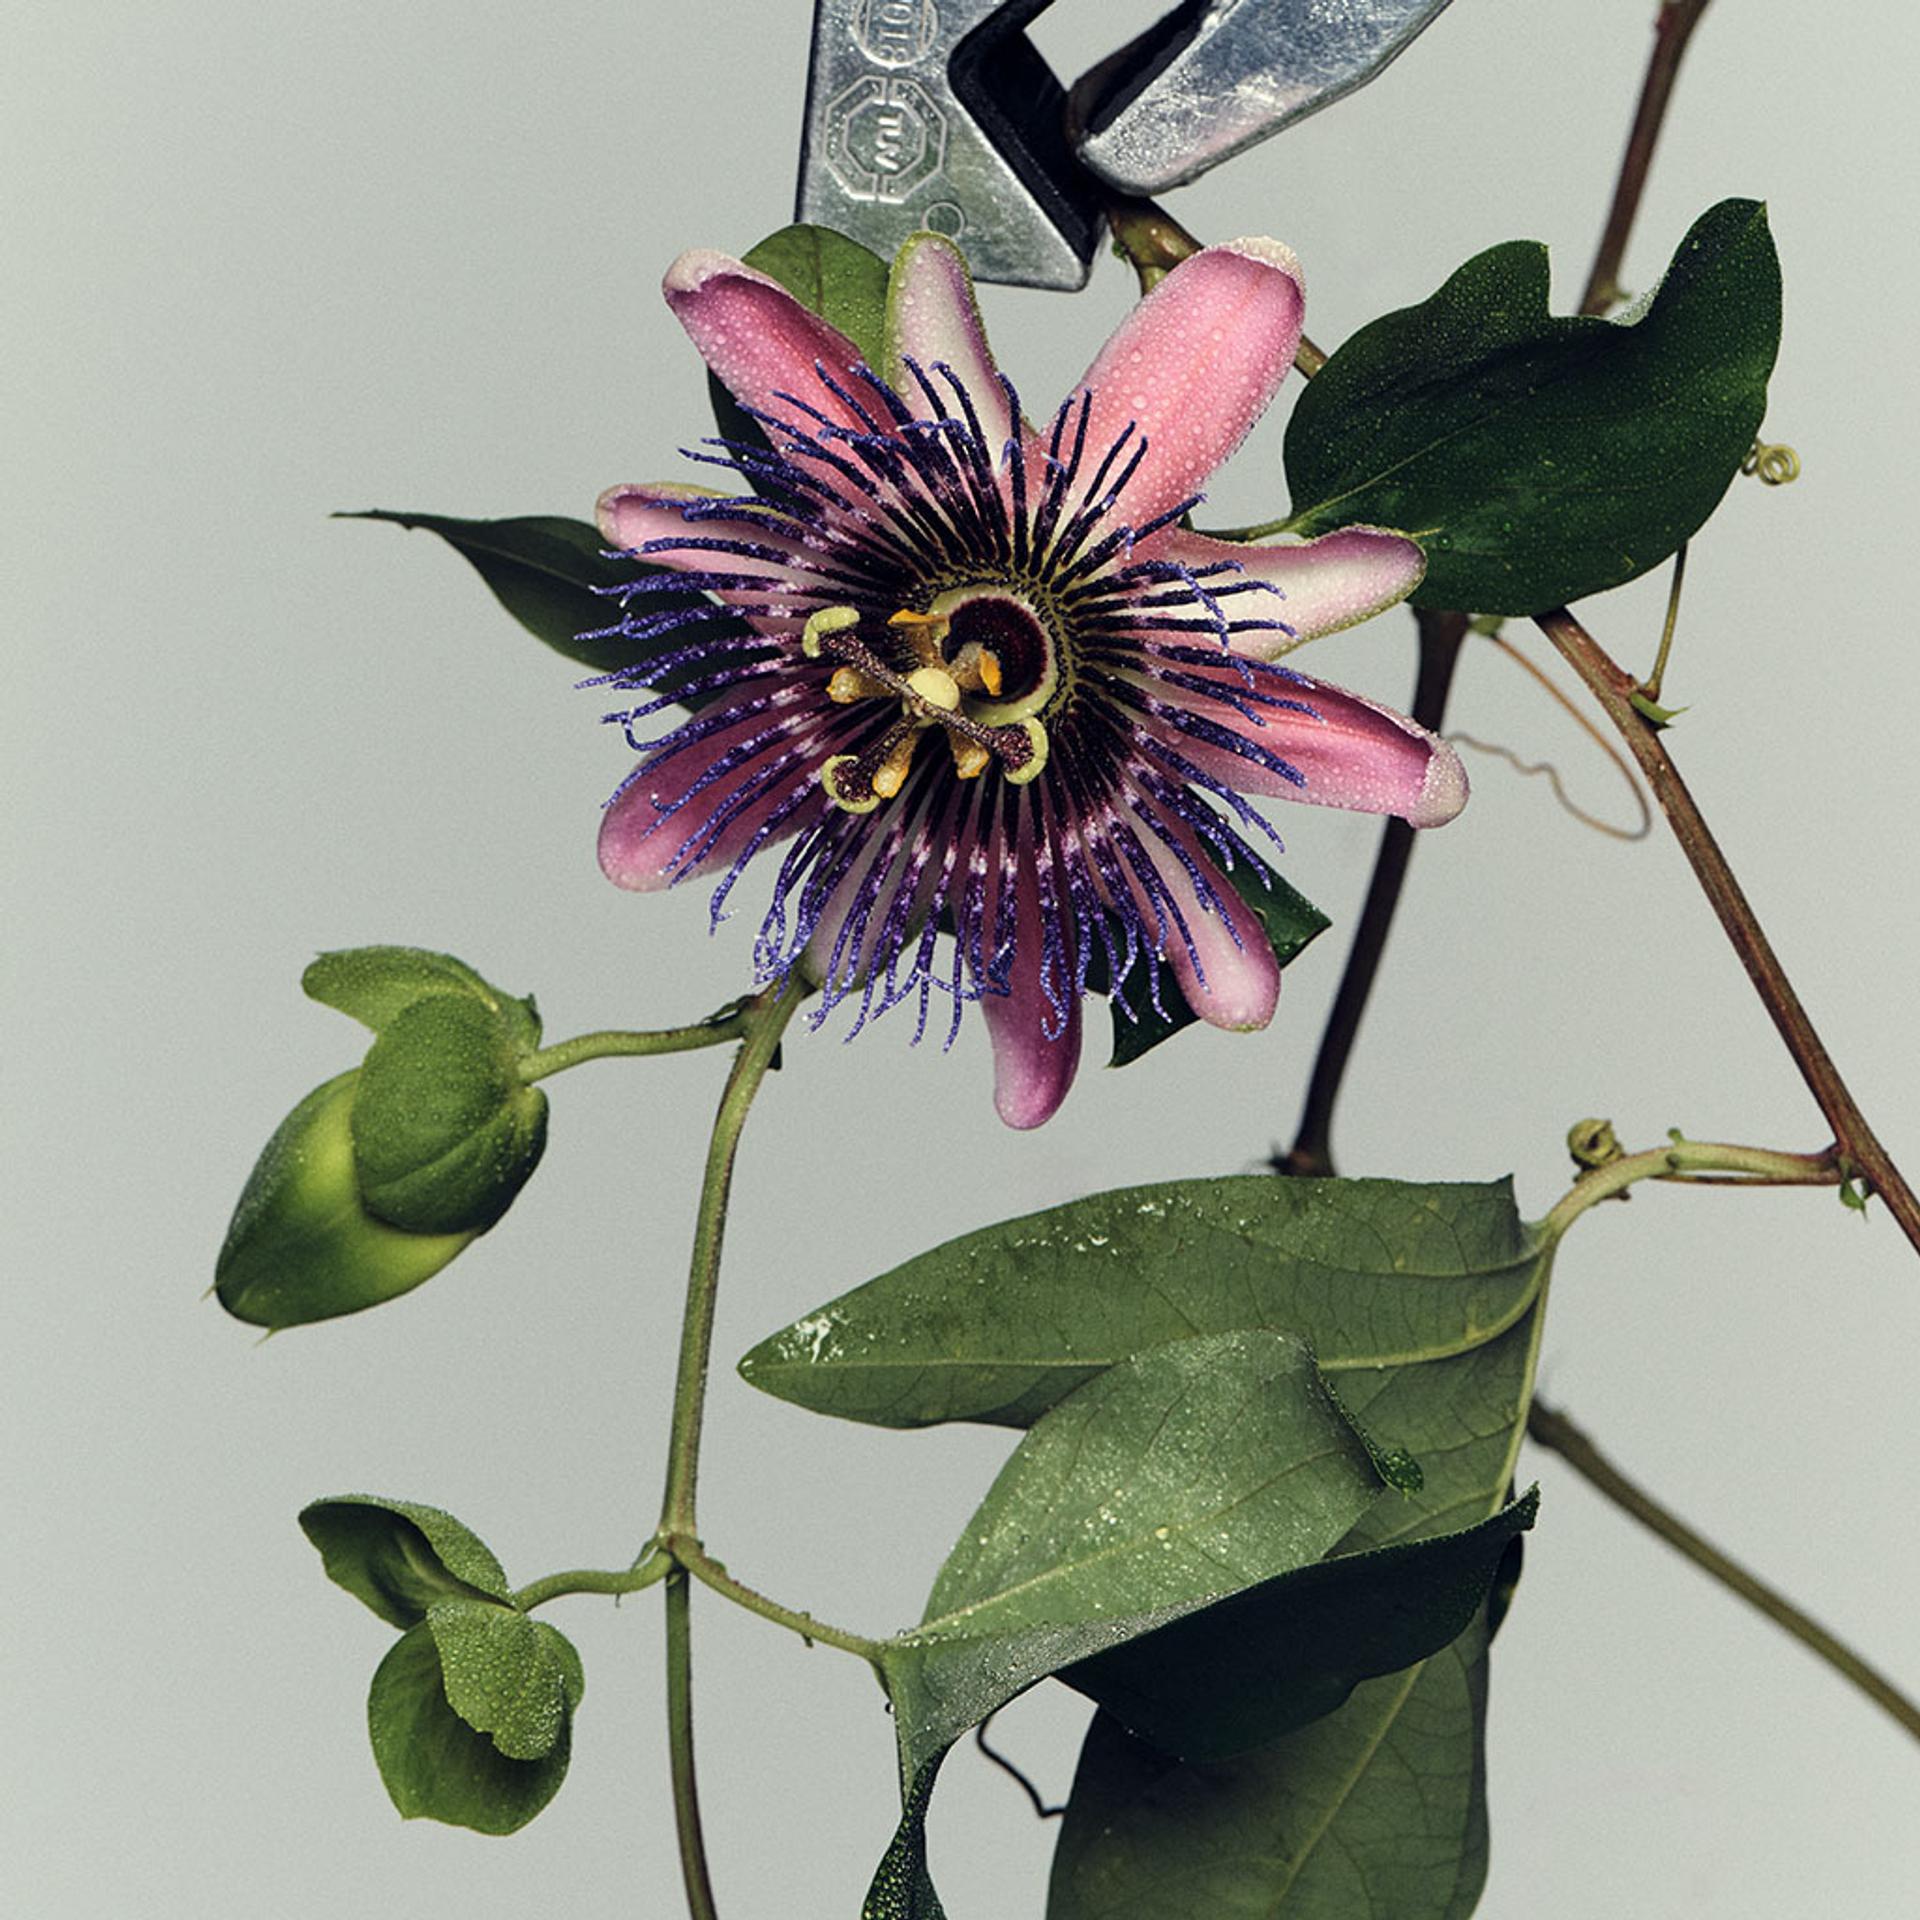 Lifestyle close up image of the centre a purple passionfruit flower